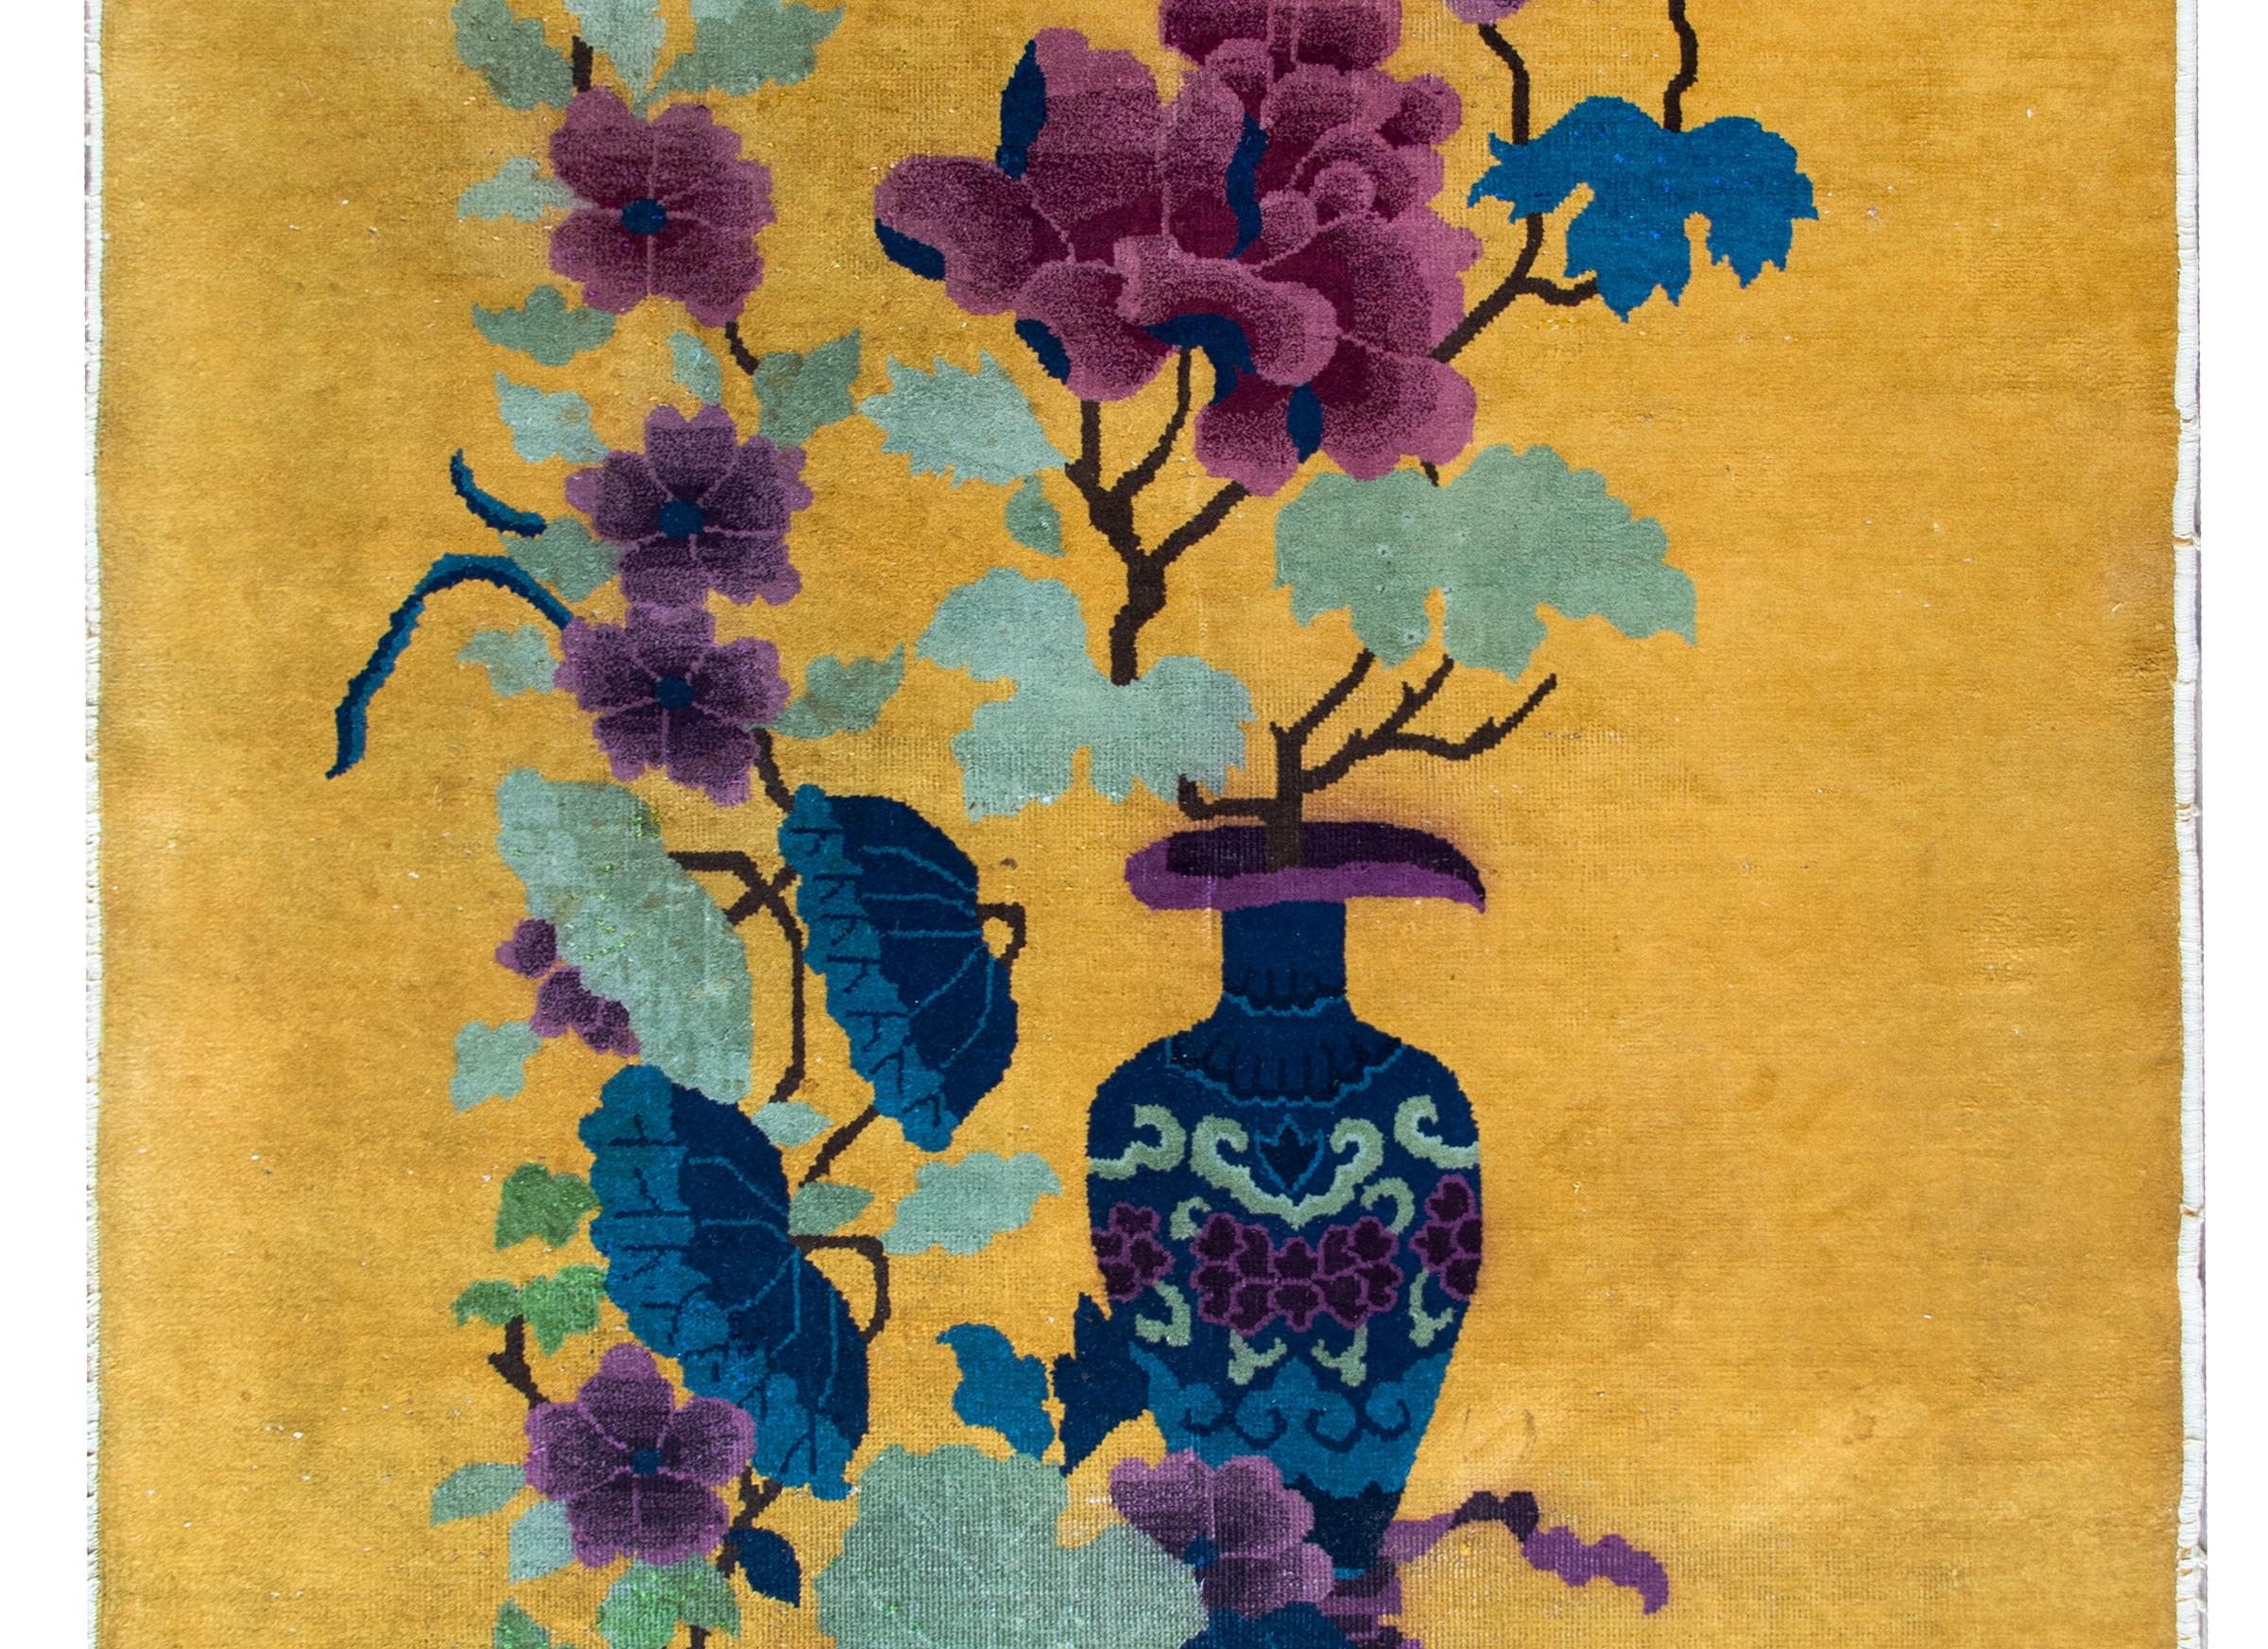 A brilliant early 20th century Chinese Art Deco rug with a wonderful asymmetrical pattern with a vase holding large peony blossoms resting amidst lotus and more peonies, all woven in indigo, green, and varying shades of purple set against a bold